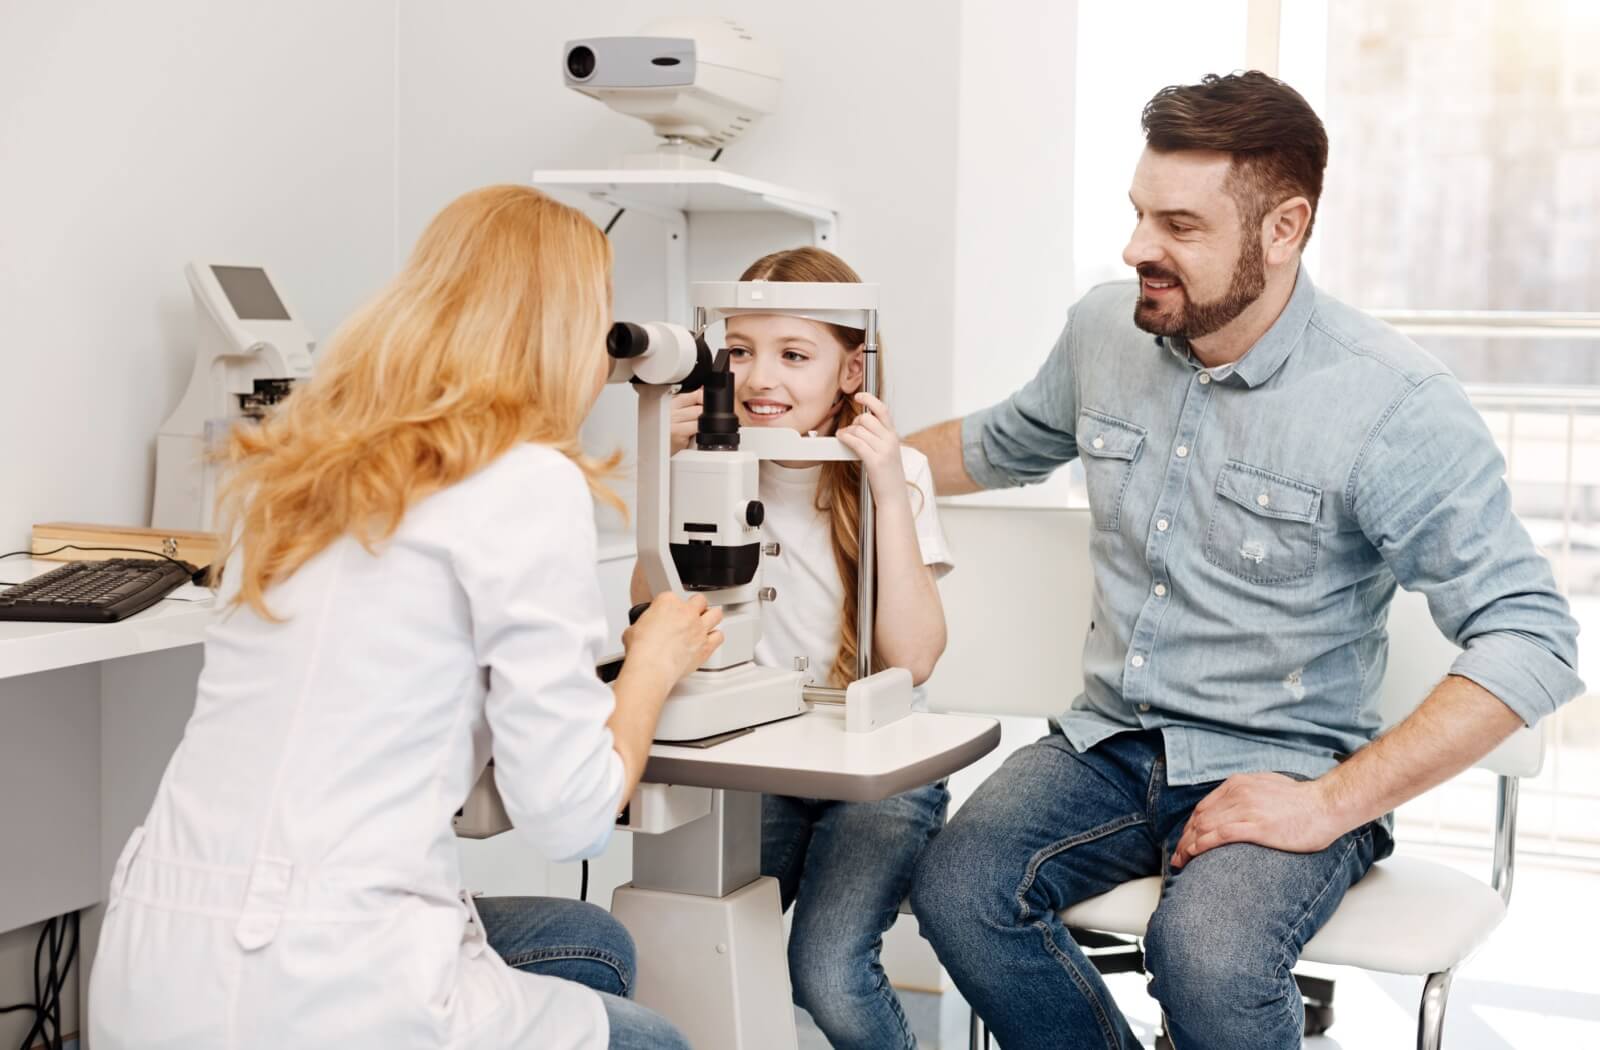 A child undergoing an eye exam. Her dad is beside her to emotionally support her.
